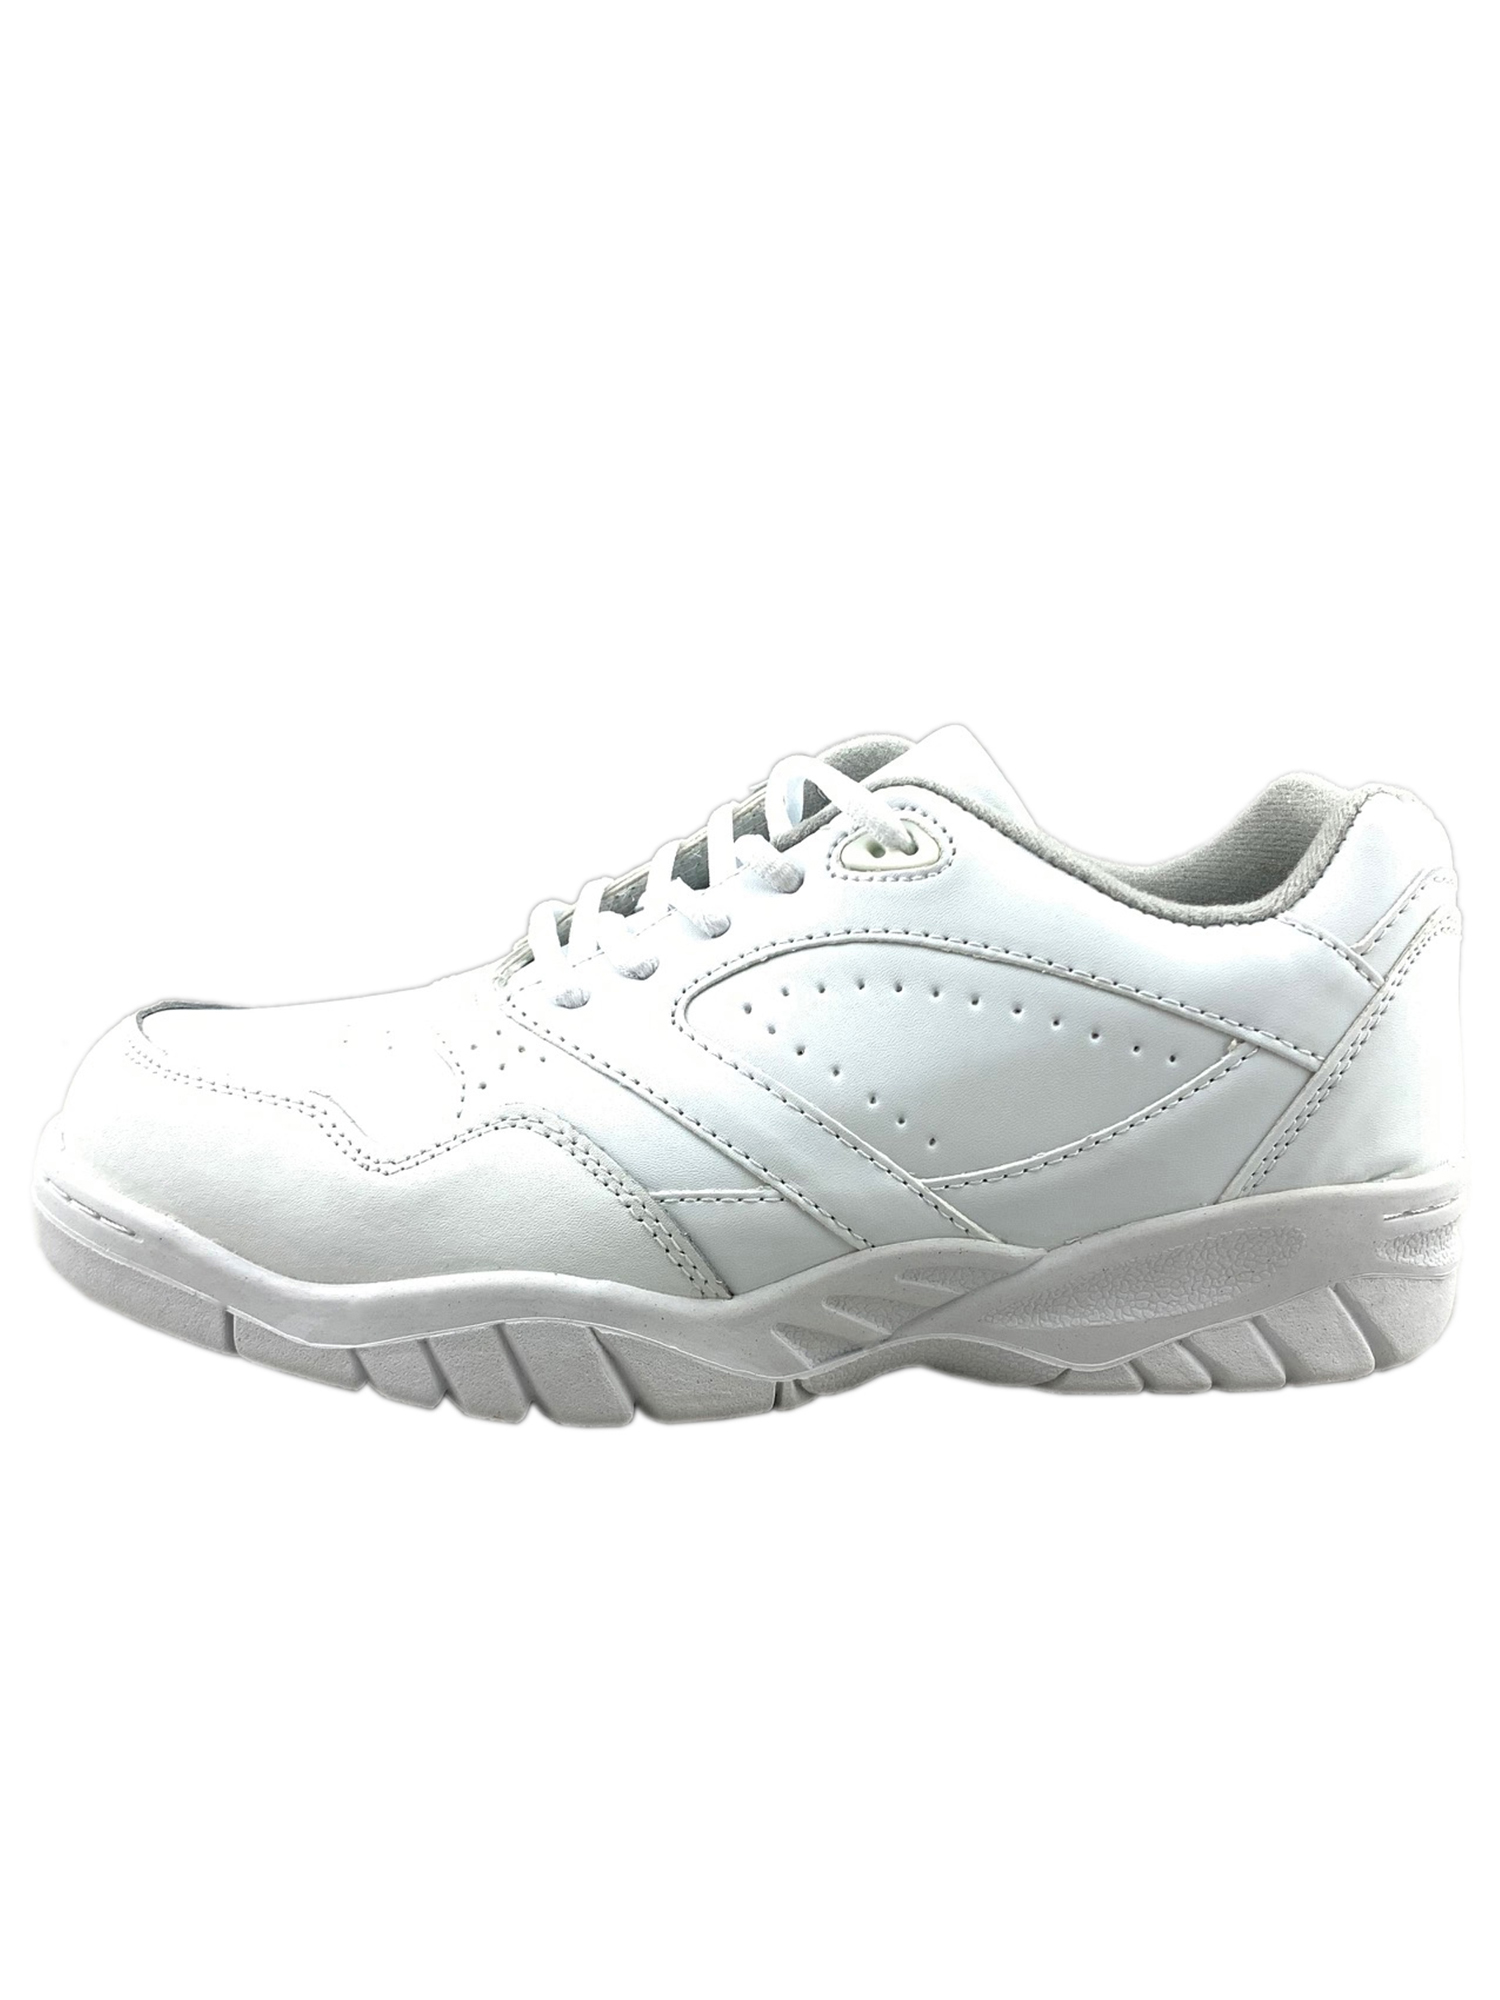 Tanleewa Men's Leather Sneakers Non-Slip Sports Shoes Lightweight Tennis Shoe Size 9 - image 3 of 5